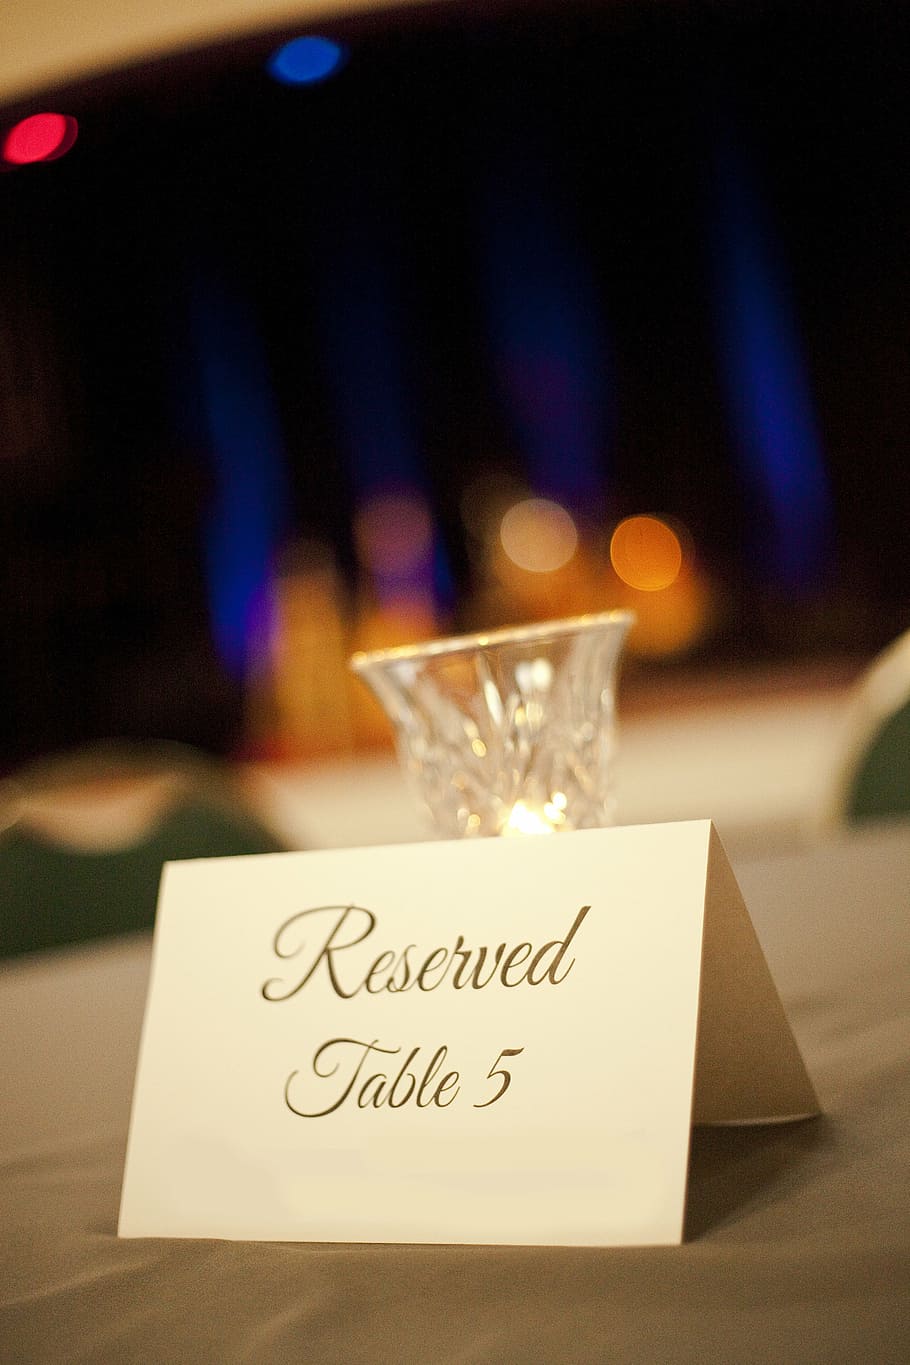 reserved, table 5 paper, glass cup, reservation, event, table, celebration, dinner, banquet, restaurant